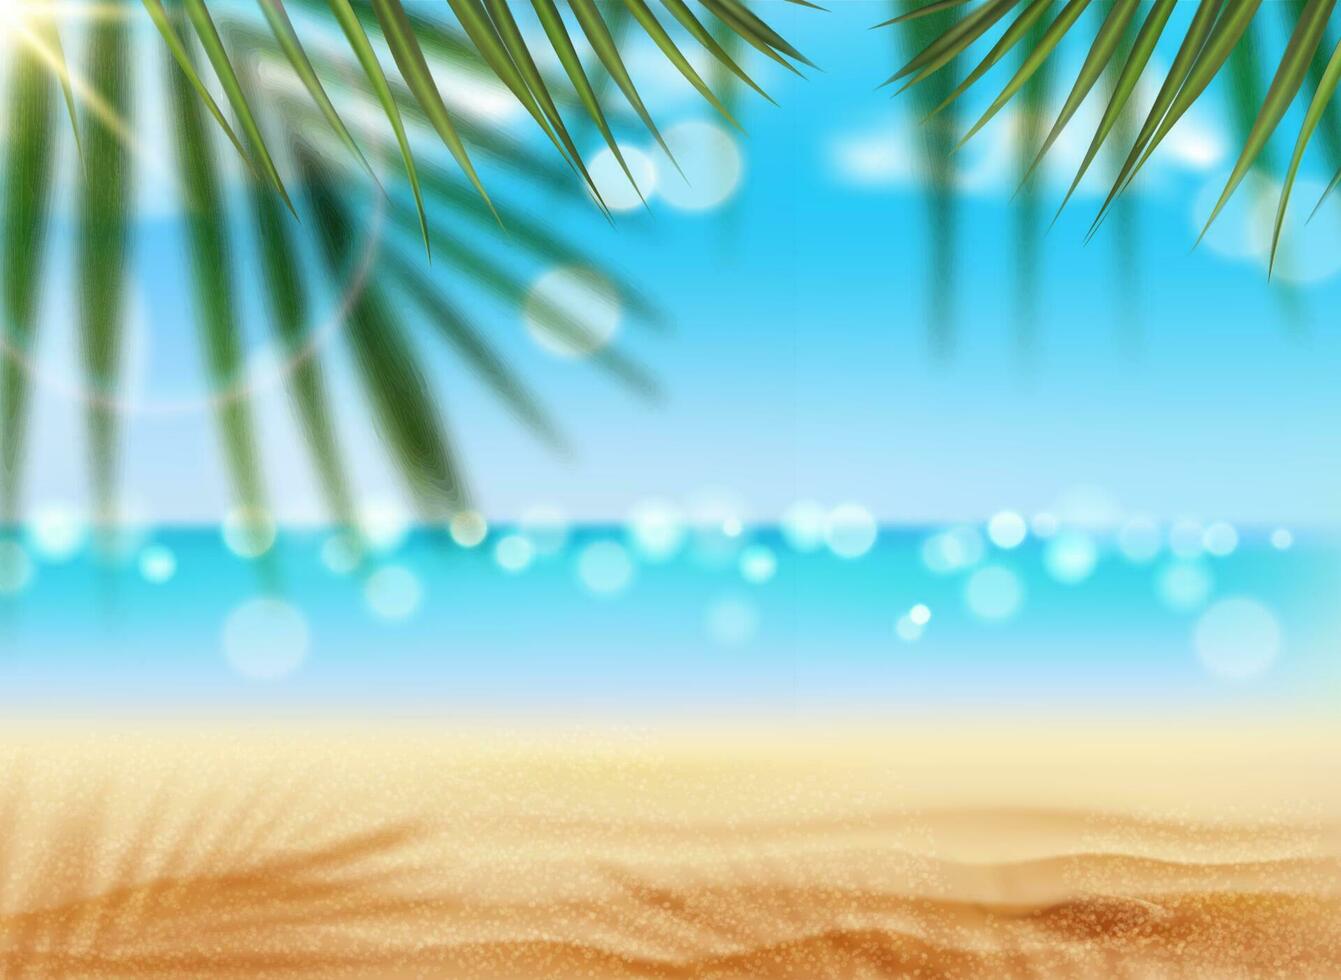 Palm beach landscape, tree silhouettes and sand vector